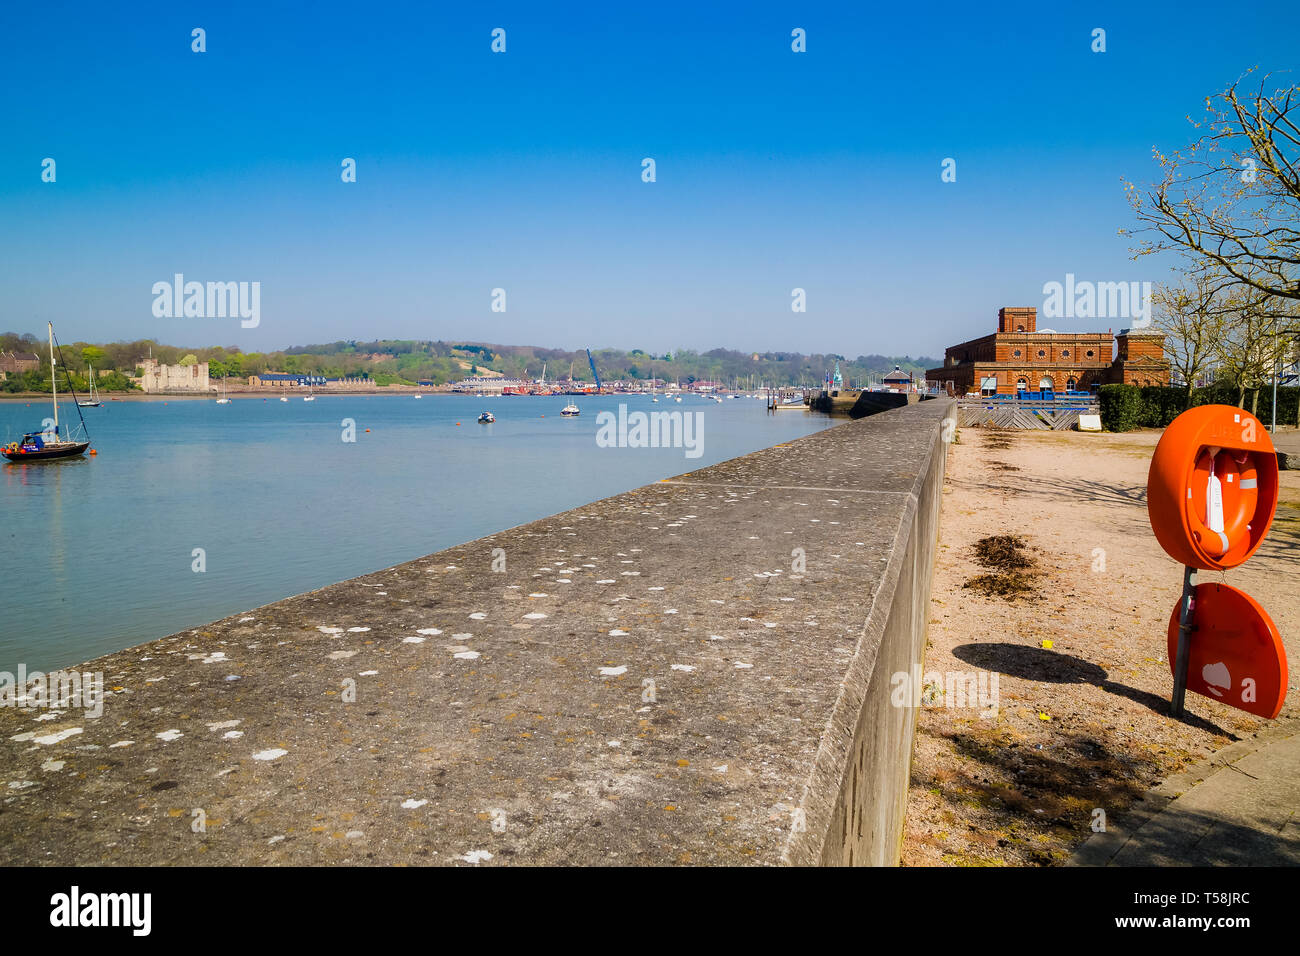 Upnor, Kent. UK. A view over the River Medway looking towards Upnor and the castle. The Copper Rivet Distillery can be seen. Stock Photo